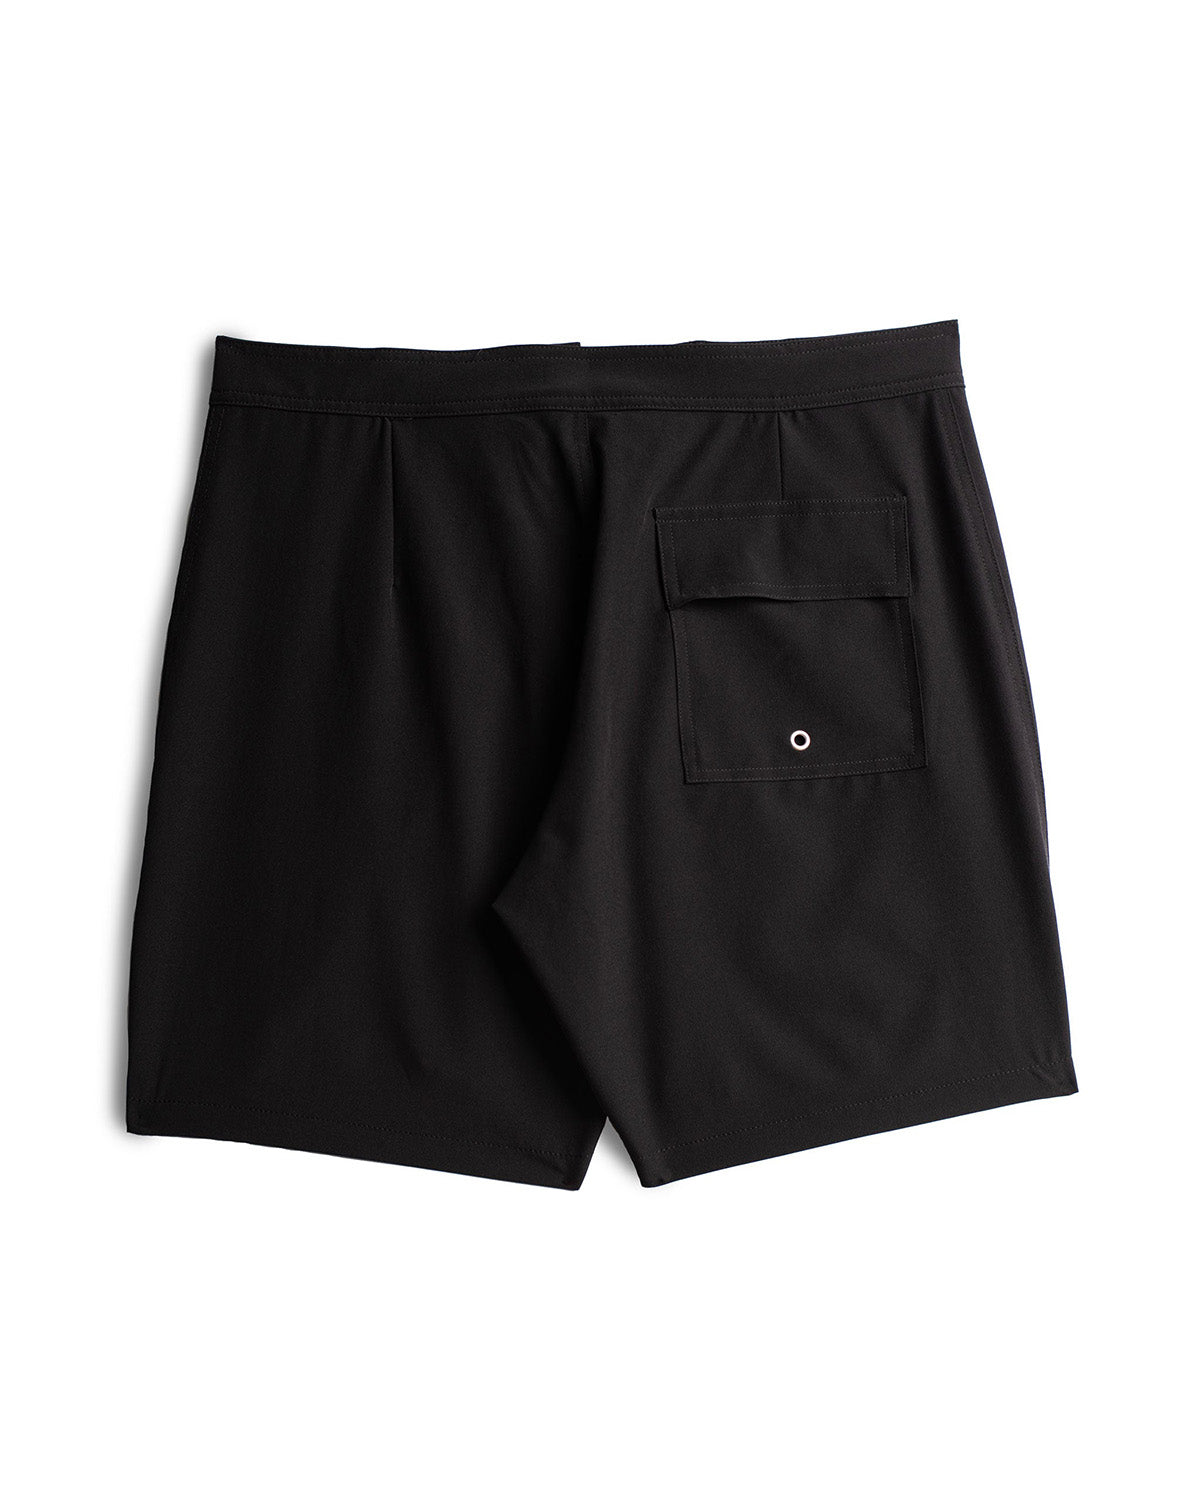 black Bather technical surf trunk back view